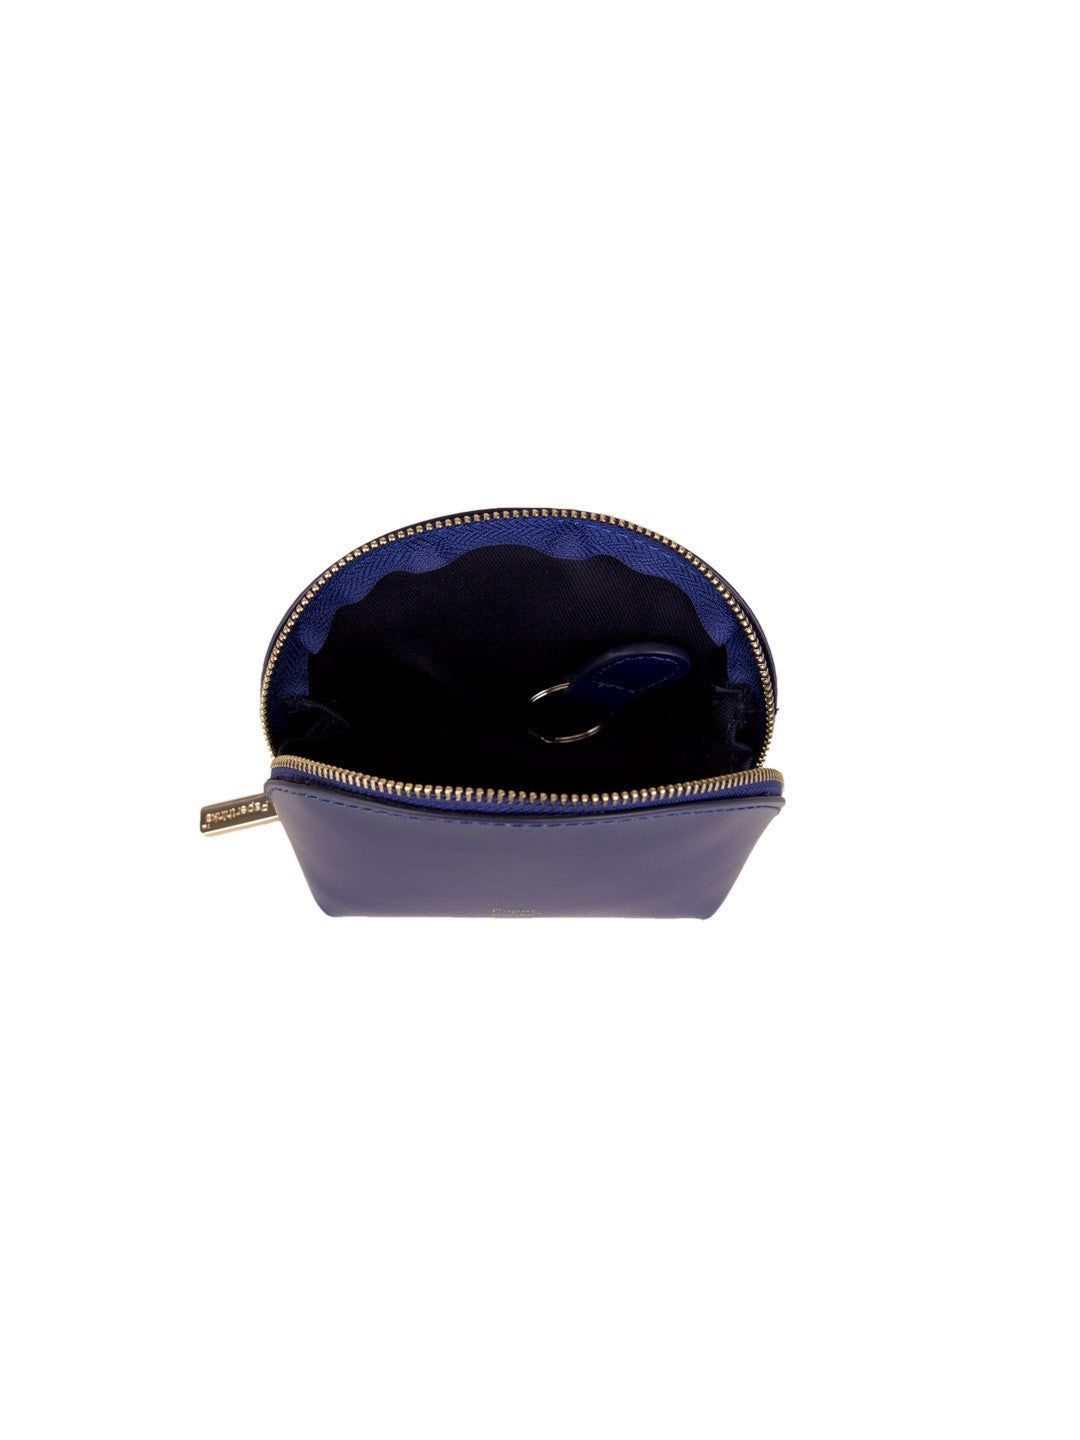 Paperthinks Recycled Leather Coin Pouch - Navy Blue - Paperthinks.us